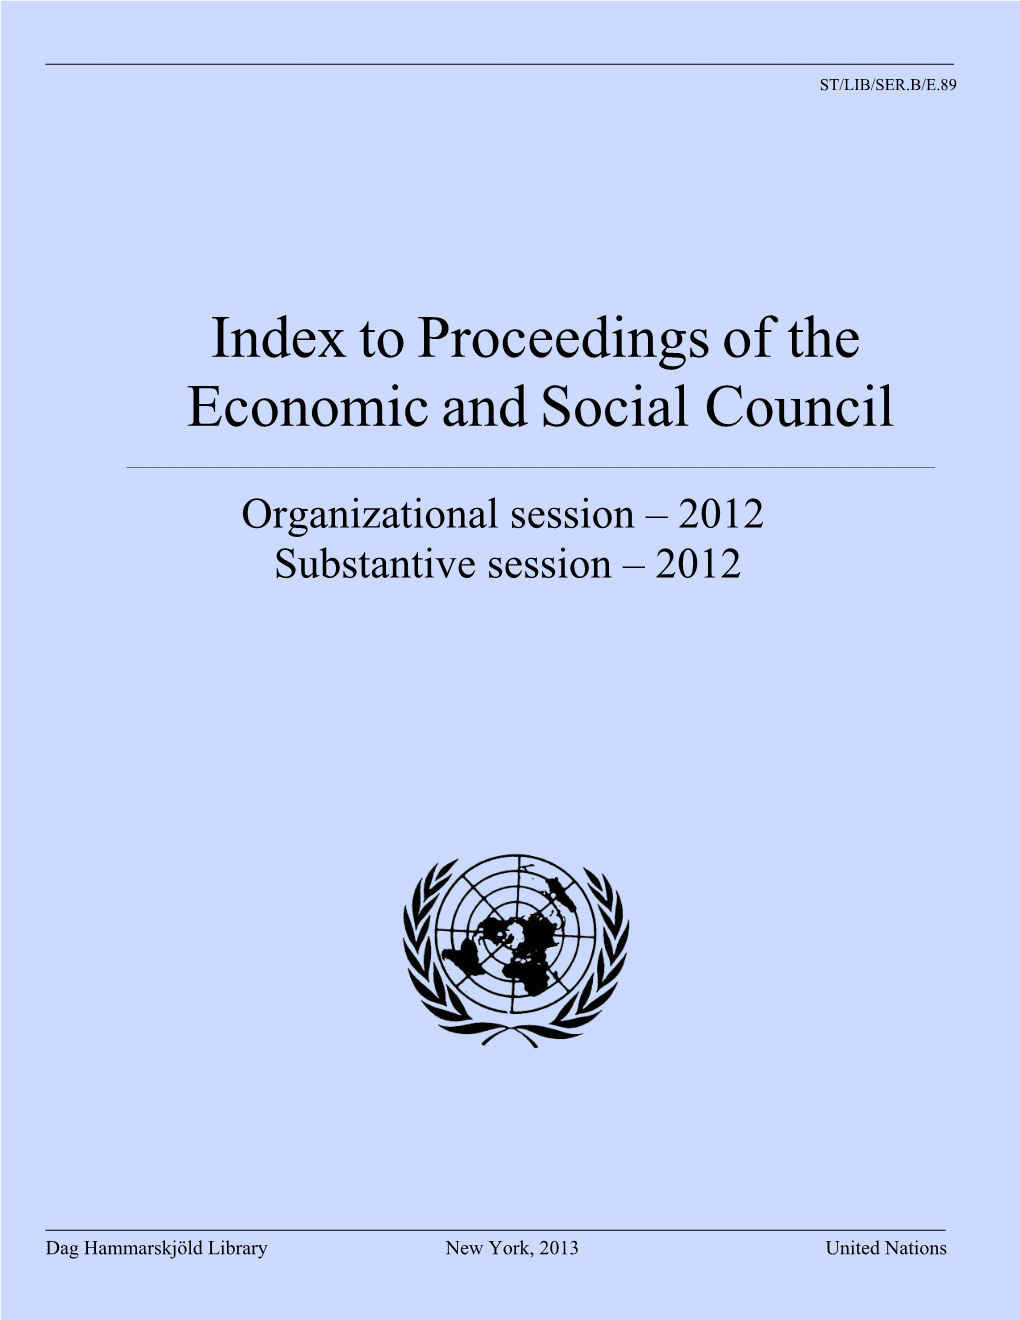 Index to Proceedings of the Economic and Social Council, 2012